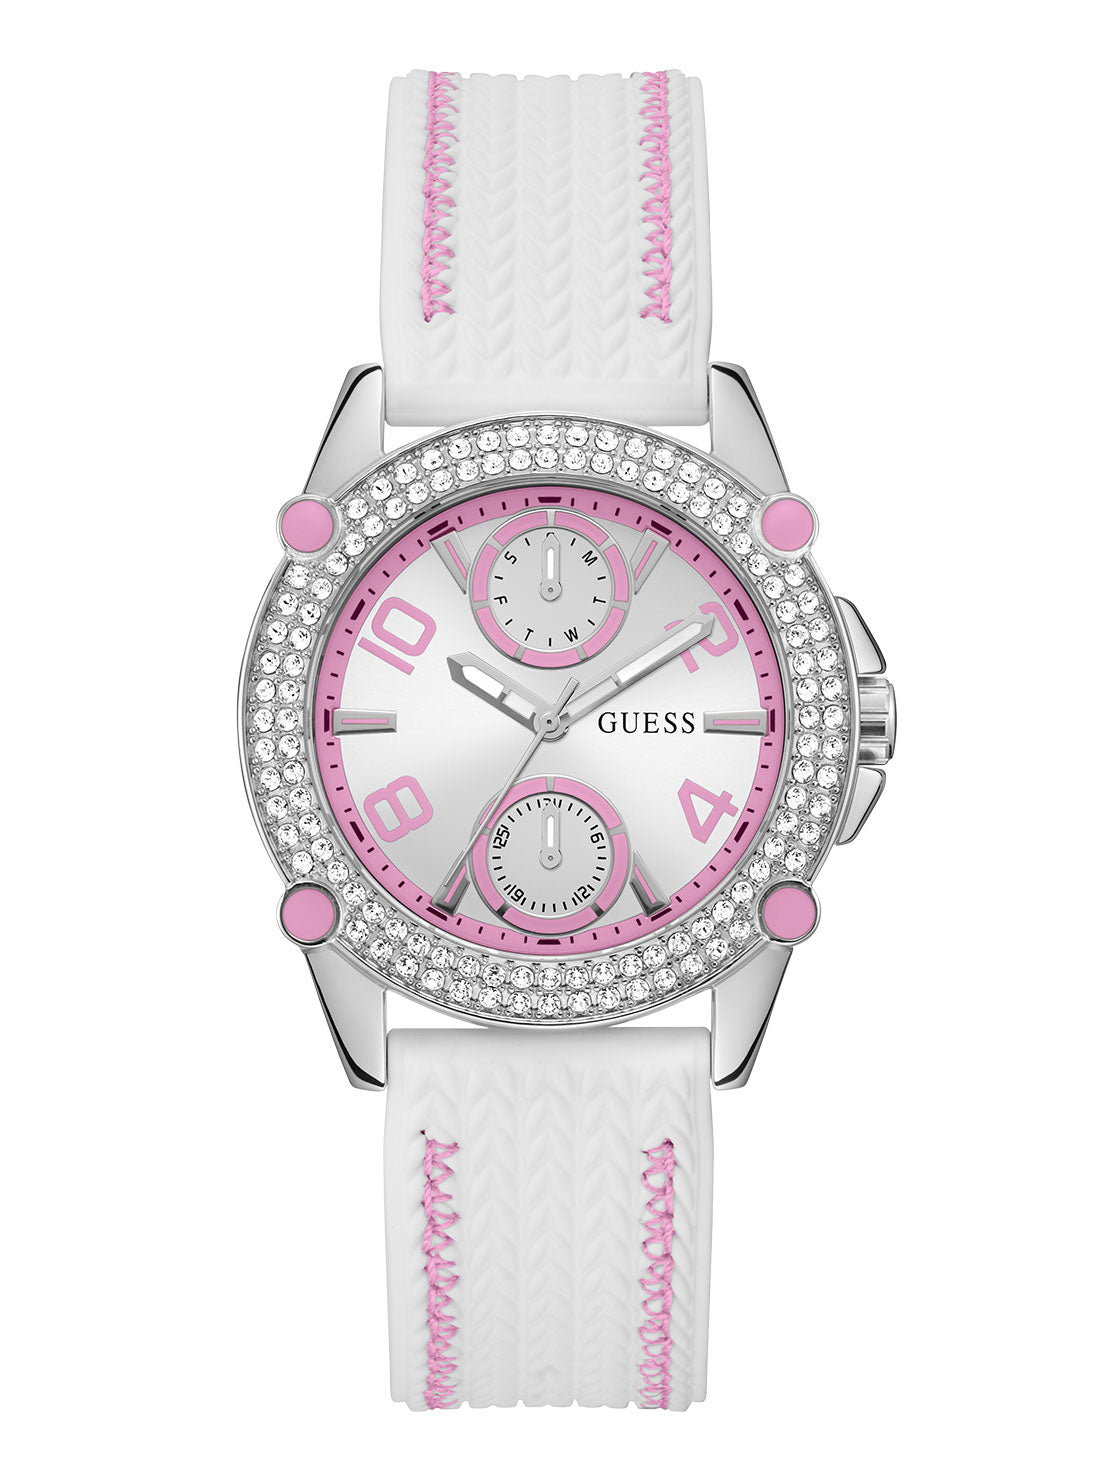 GUESS Women's White Pink Sporty Spice Silicone Watch GW0554L1 Front View